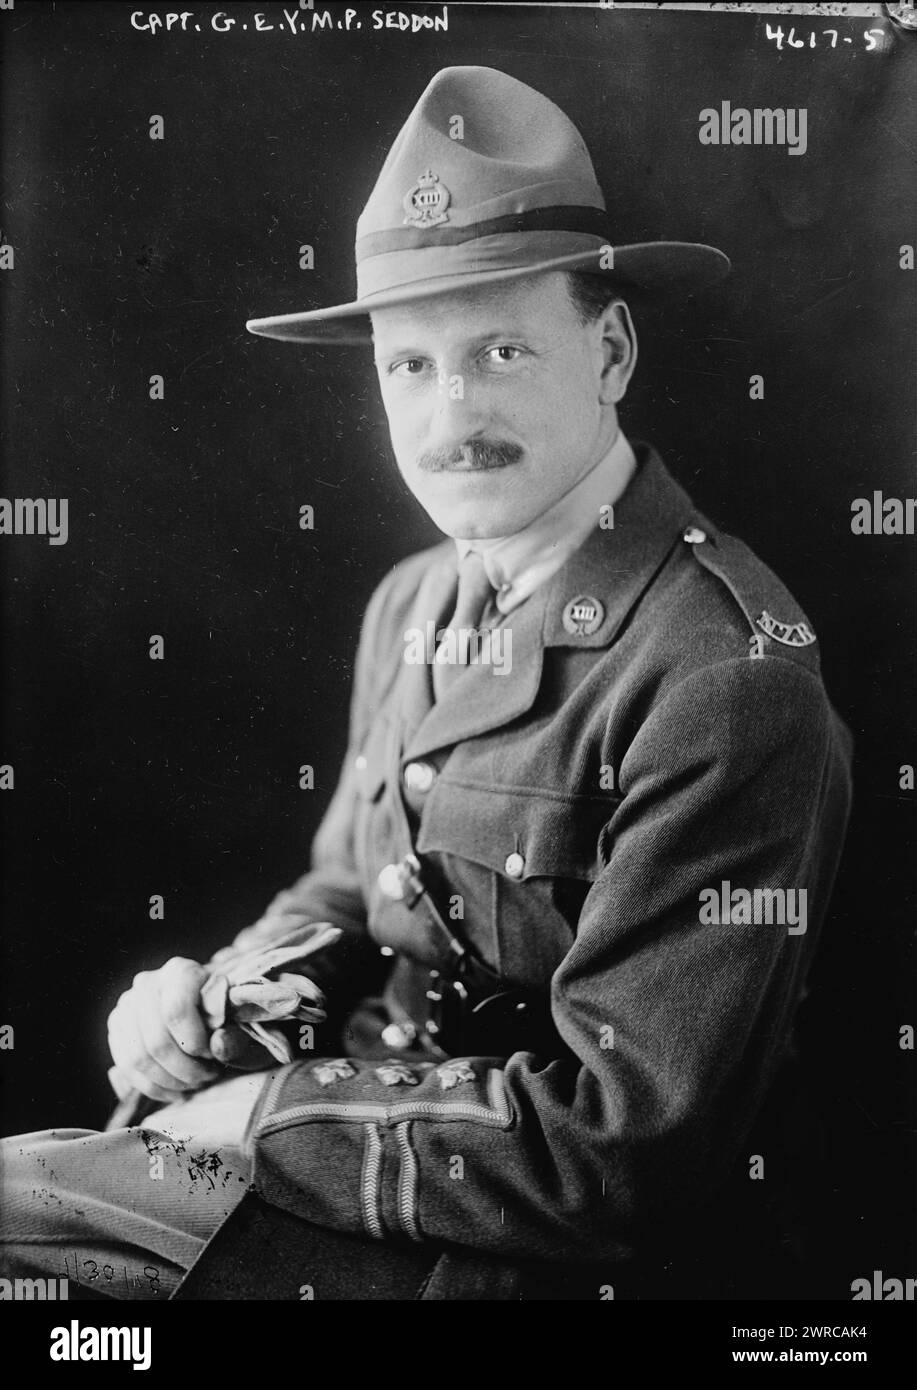 Capt. G.E.Y.M.P. Seddon, Photograph shows Thomas Edward Youd 'Tom' Seddon (1884-1972), a New Zealand Liberal Party politician and lawyer who served in the New Zealand Army in World War I., 1918 July 30, Glass negatives, 1 negative: glass Stock Photo